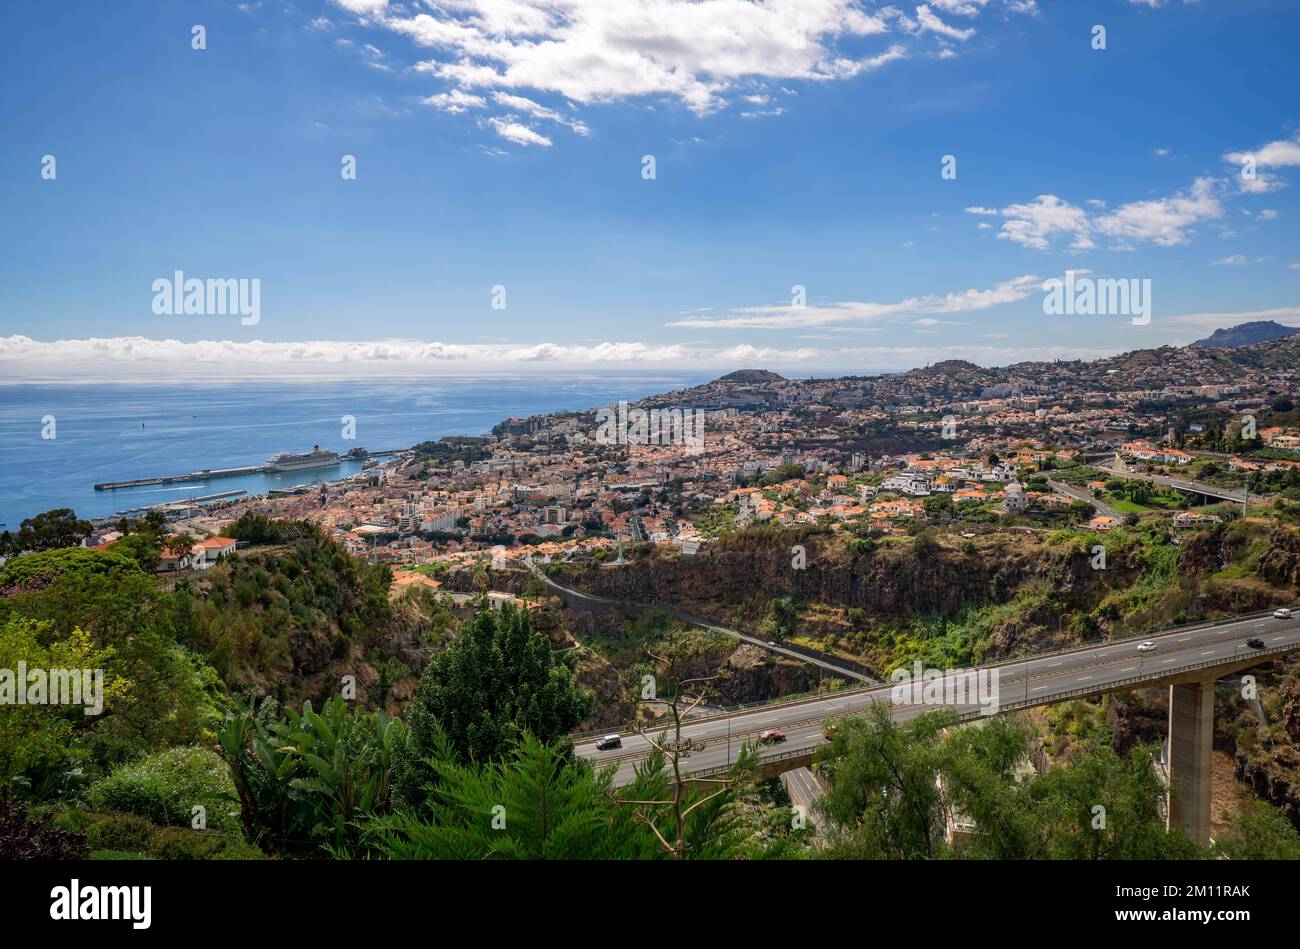 View of Funchal on the Portuguese island of Madeira Stock Photo